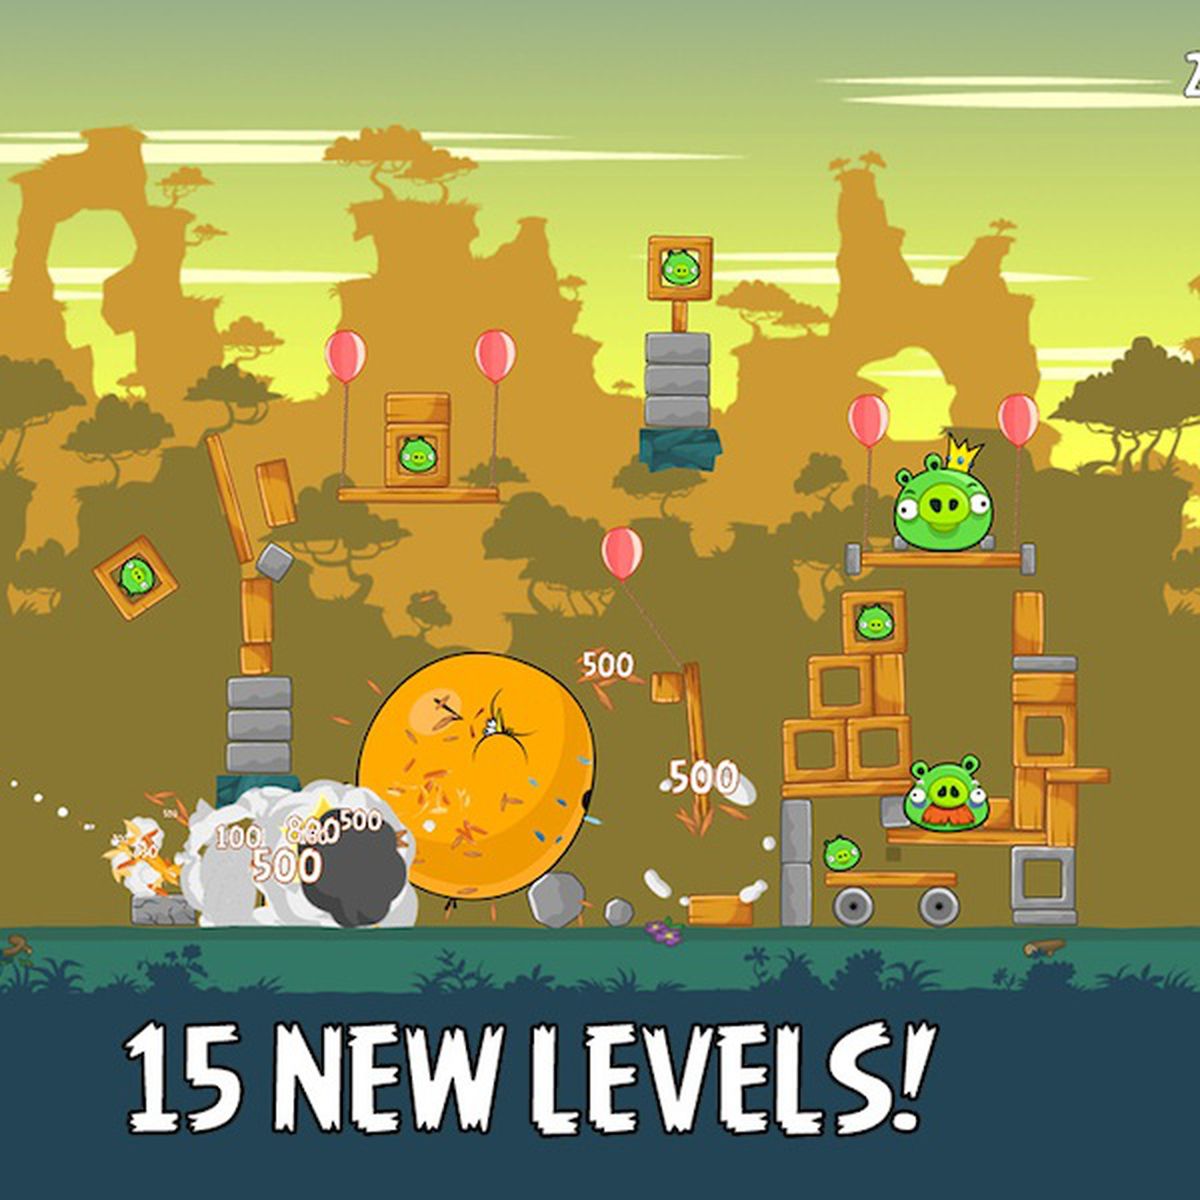 Angry Birds Epic Flies Into App Stores